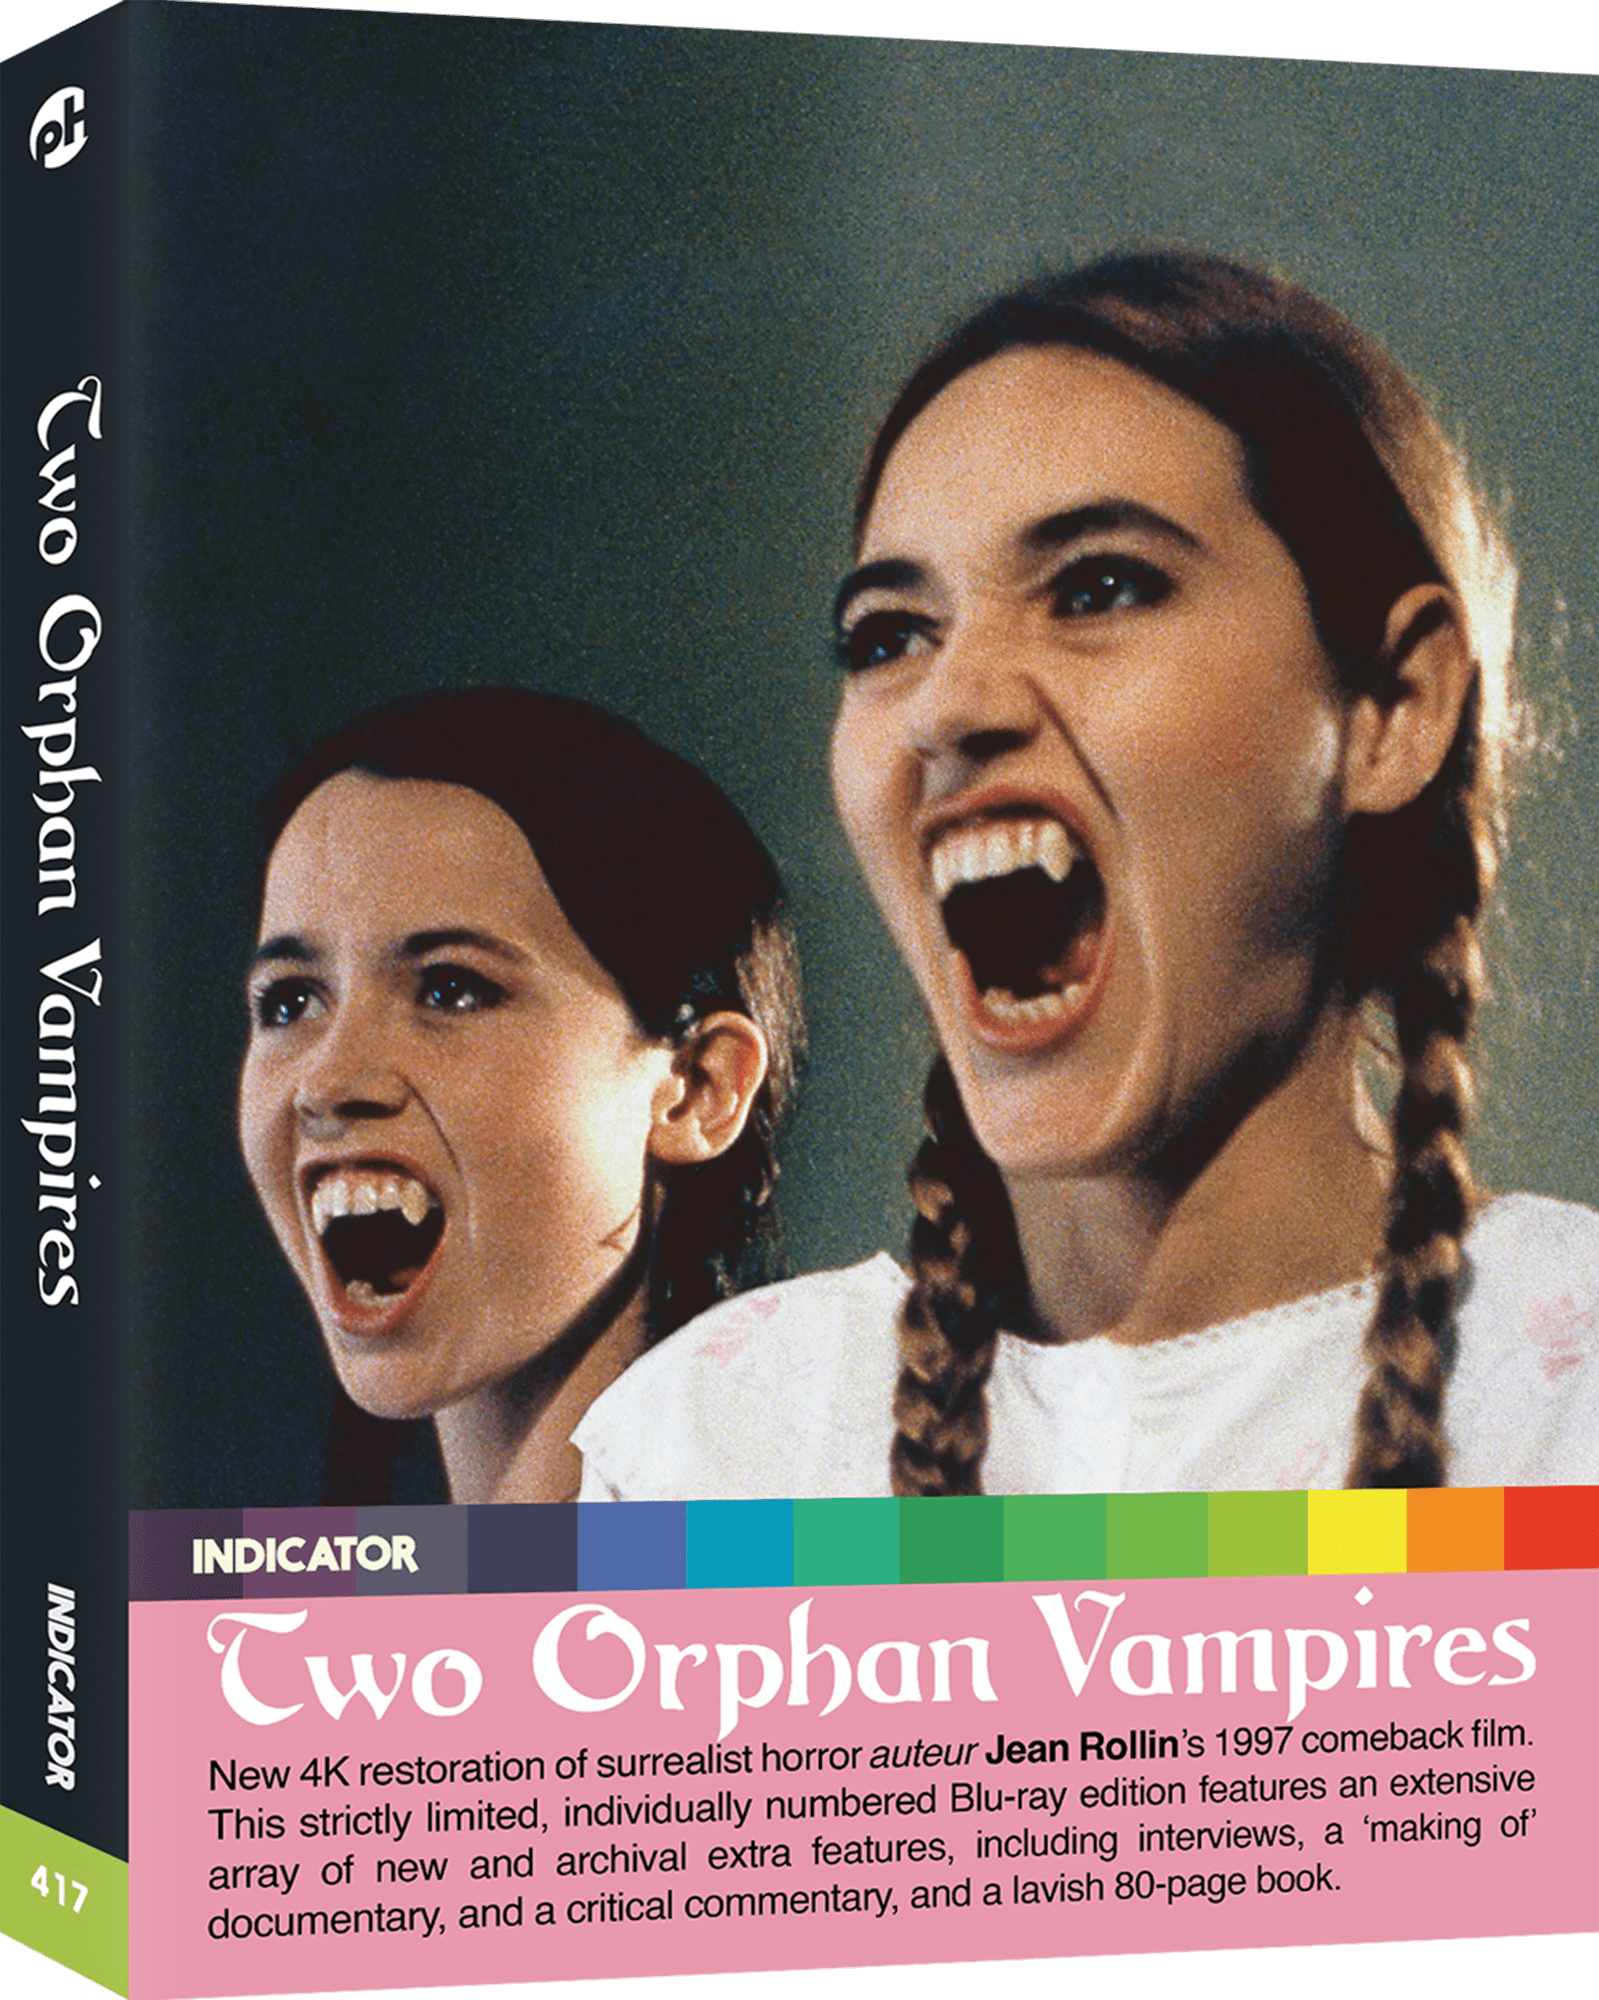 Picture of two vampire girls, a still from the Jean Rollin film Two Orhpan Vampires